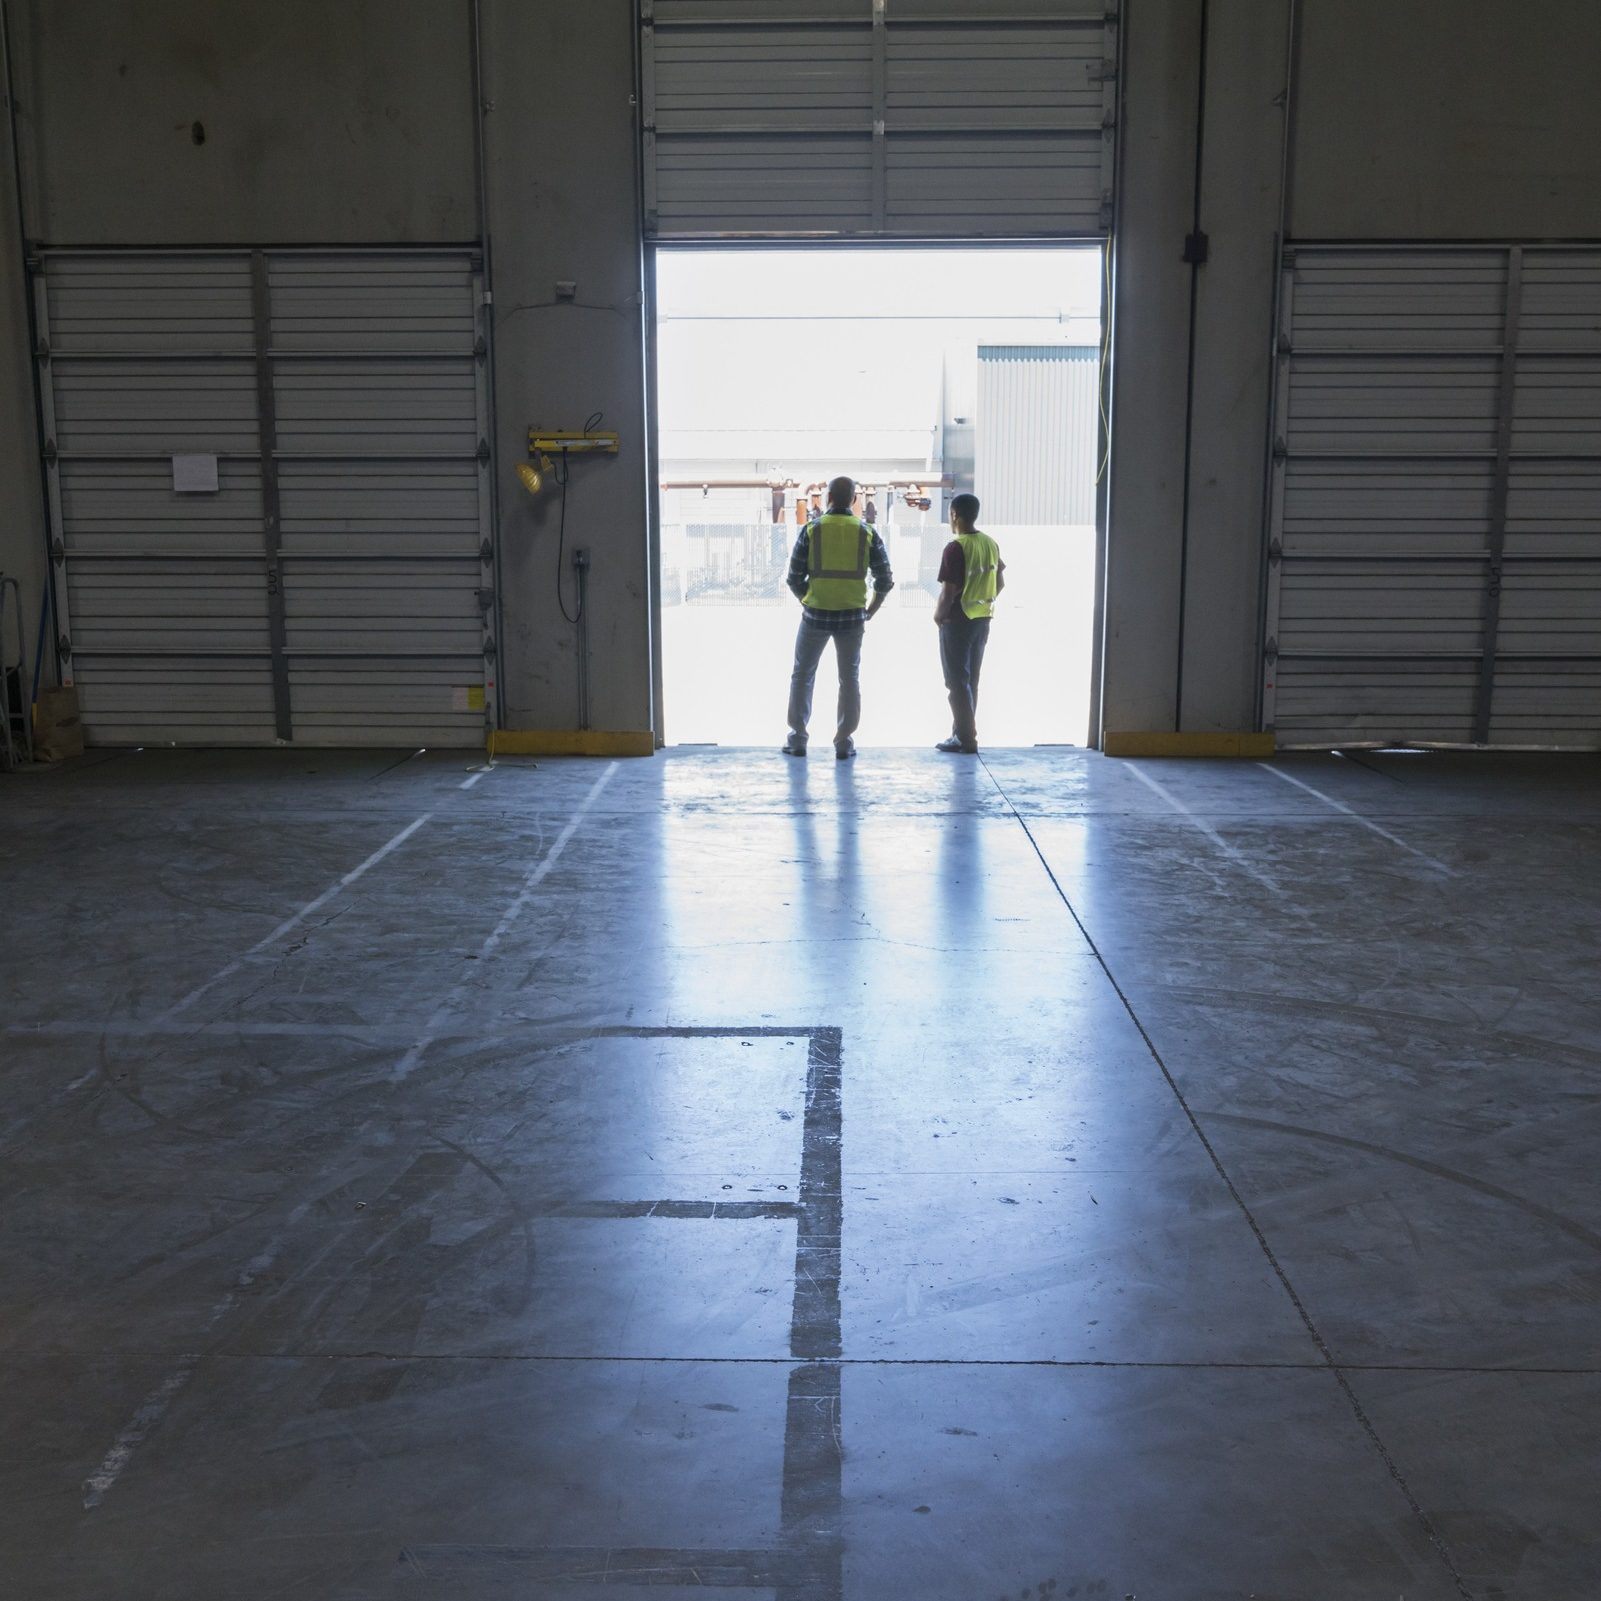 Warehouse loading dock door and warehouse workers waiting for product to arrive.